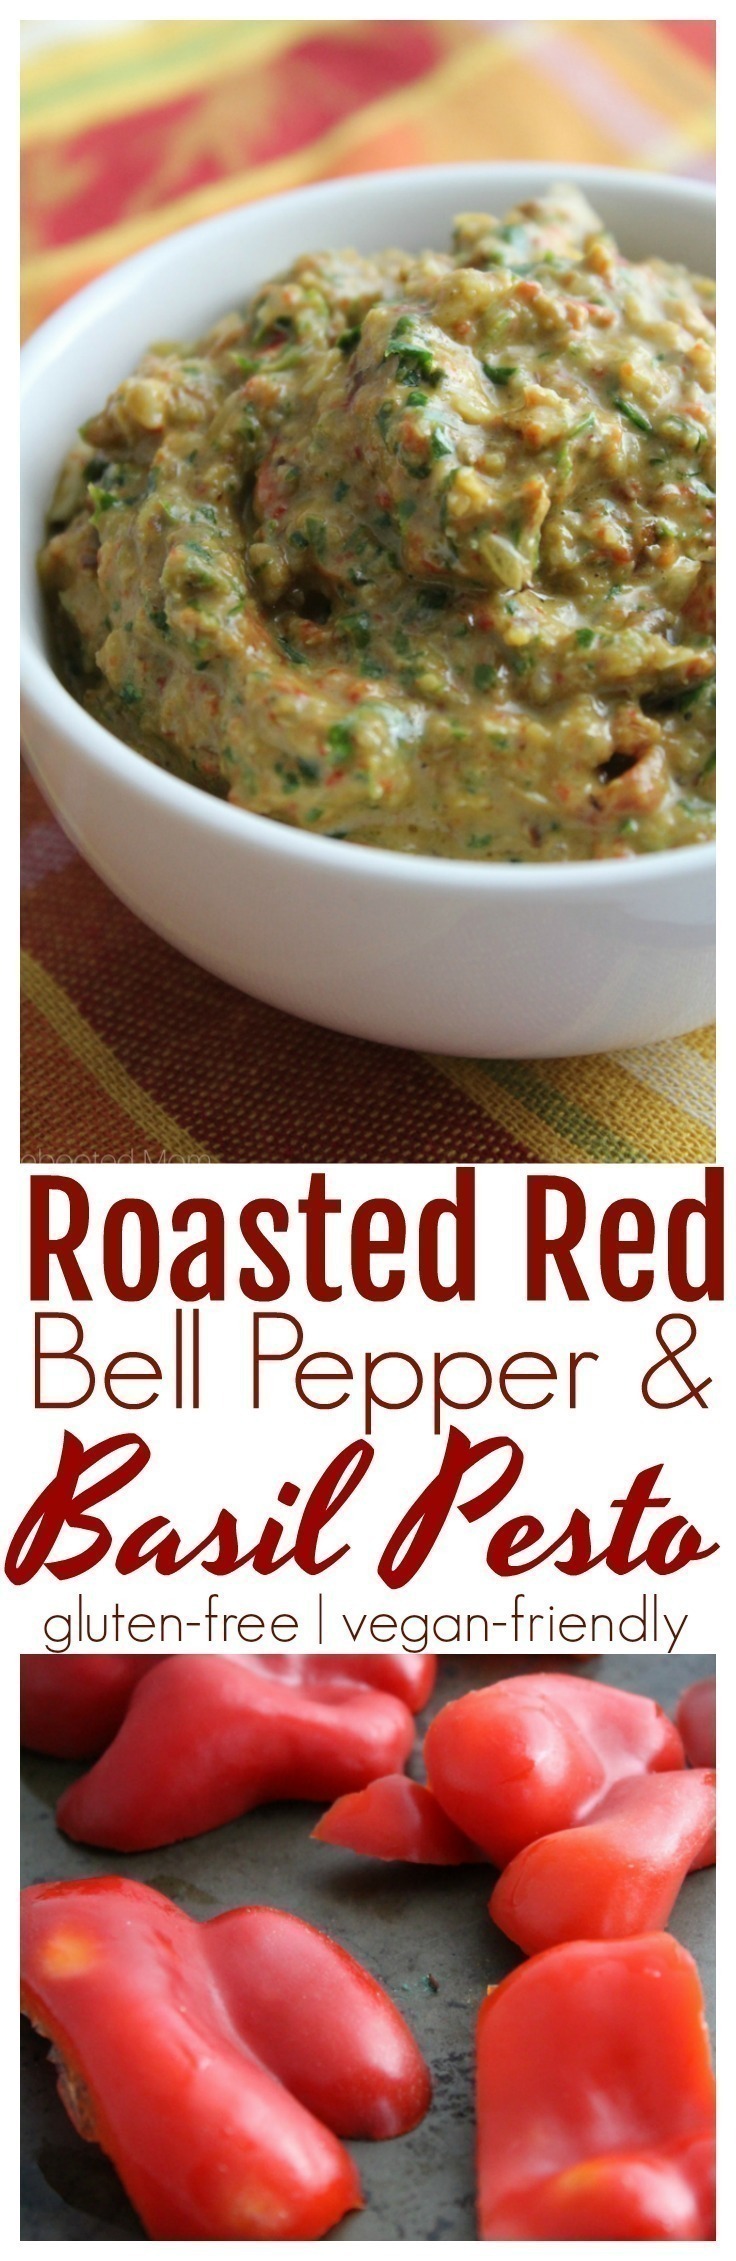 A delicious combination of roasted red bell peppers and fresh basil in a pesto that takes just minutes to make!